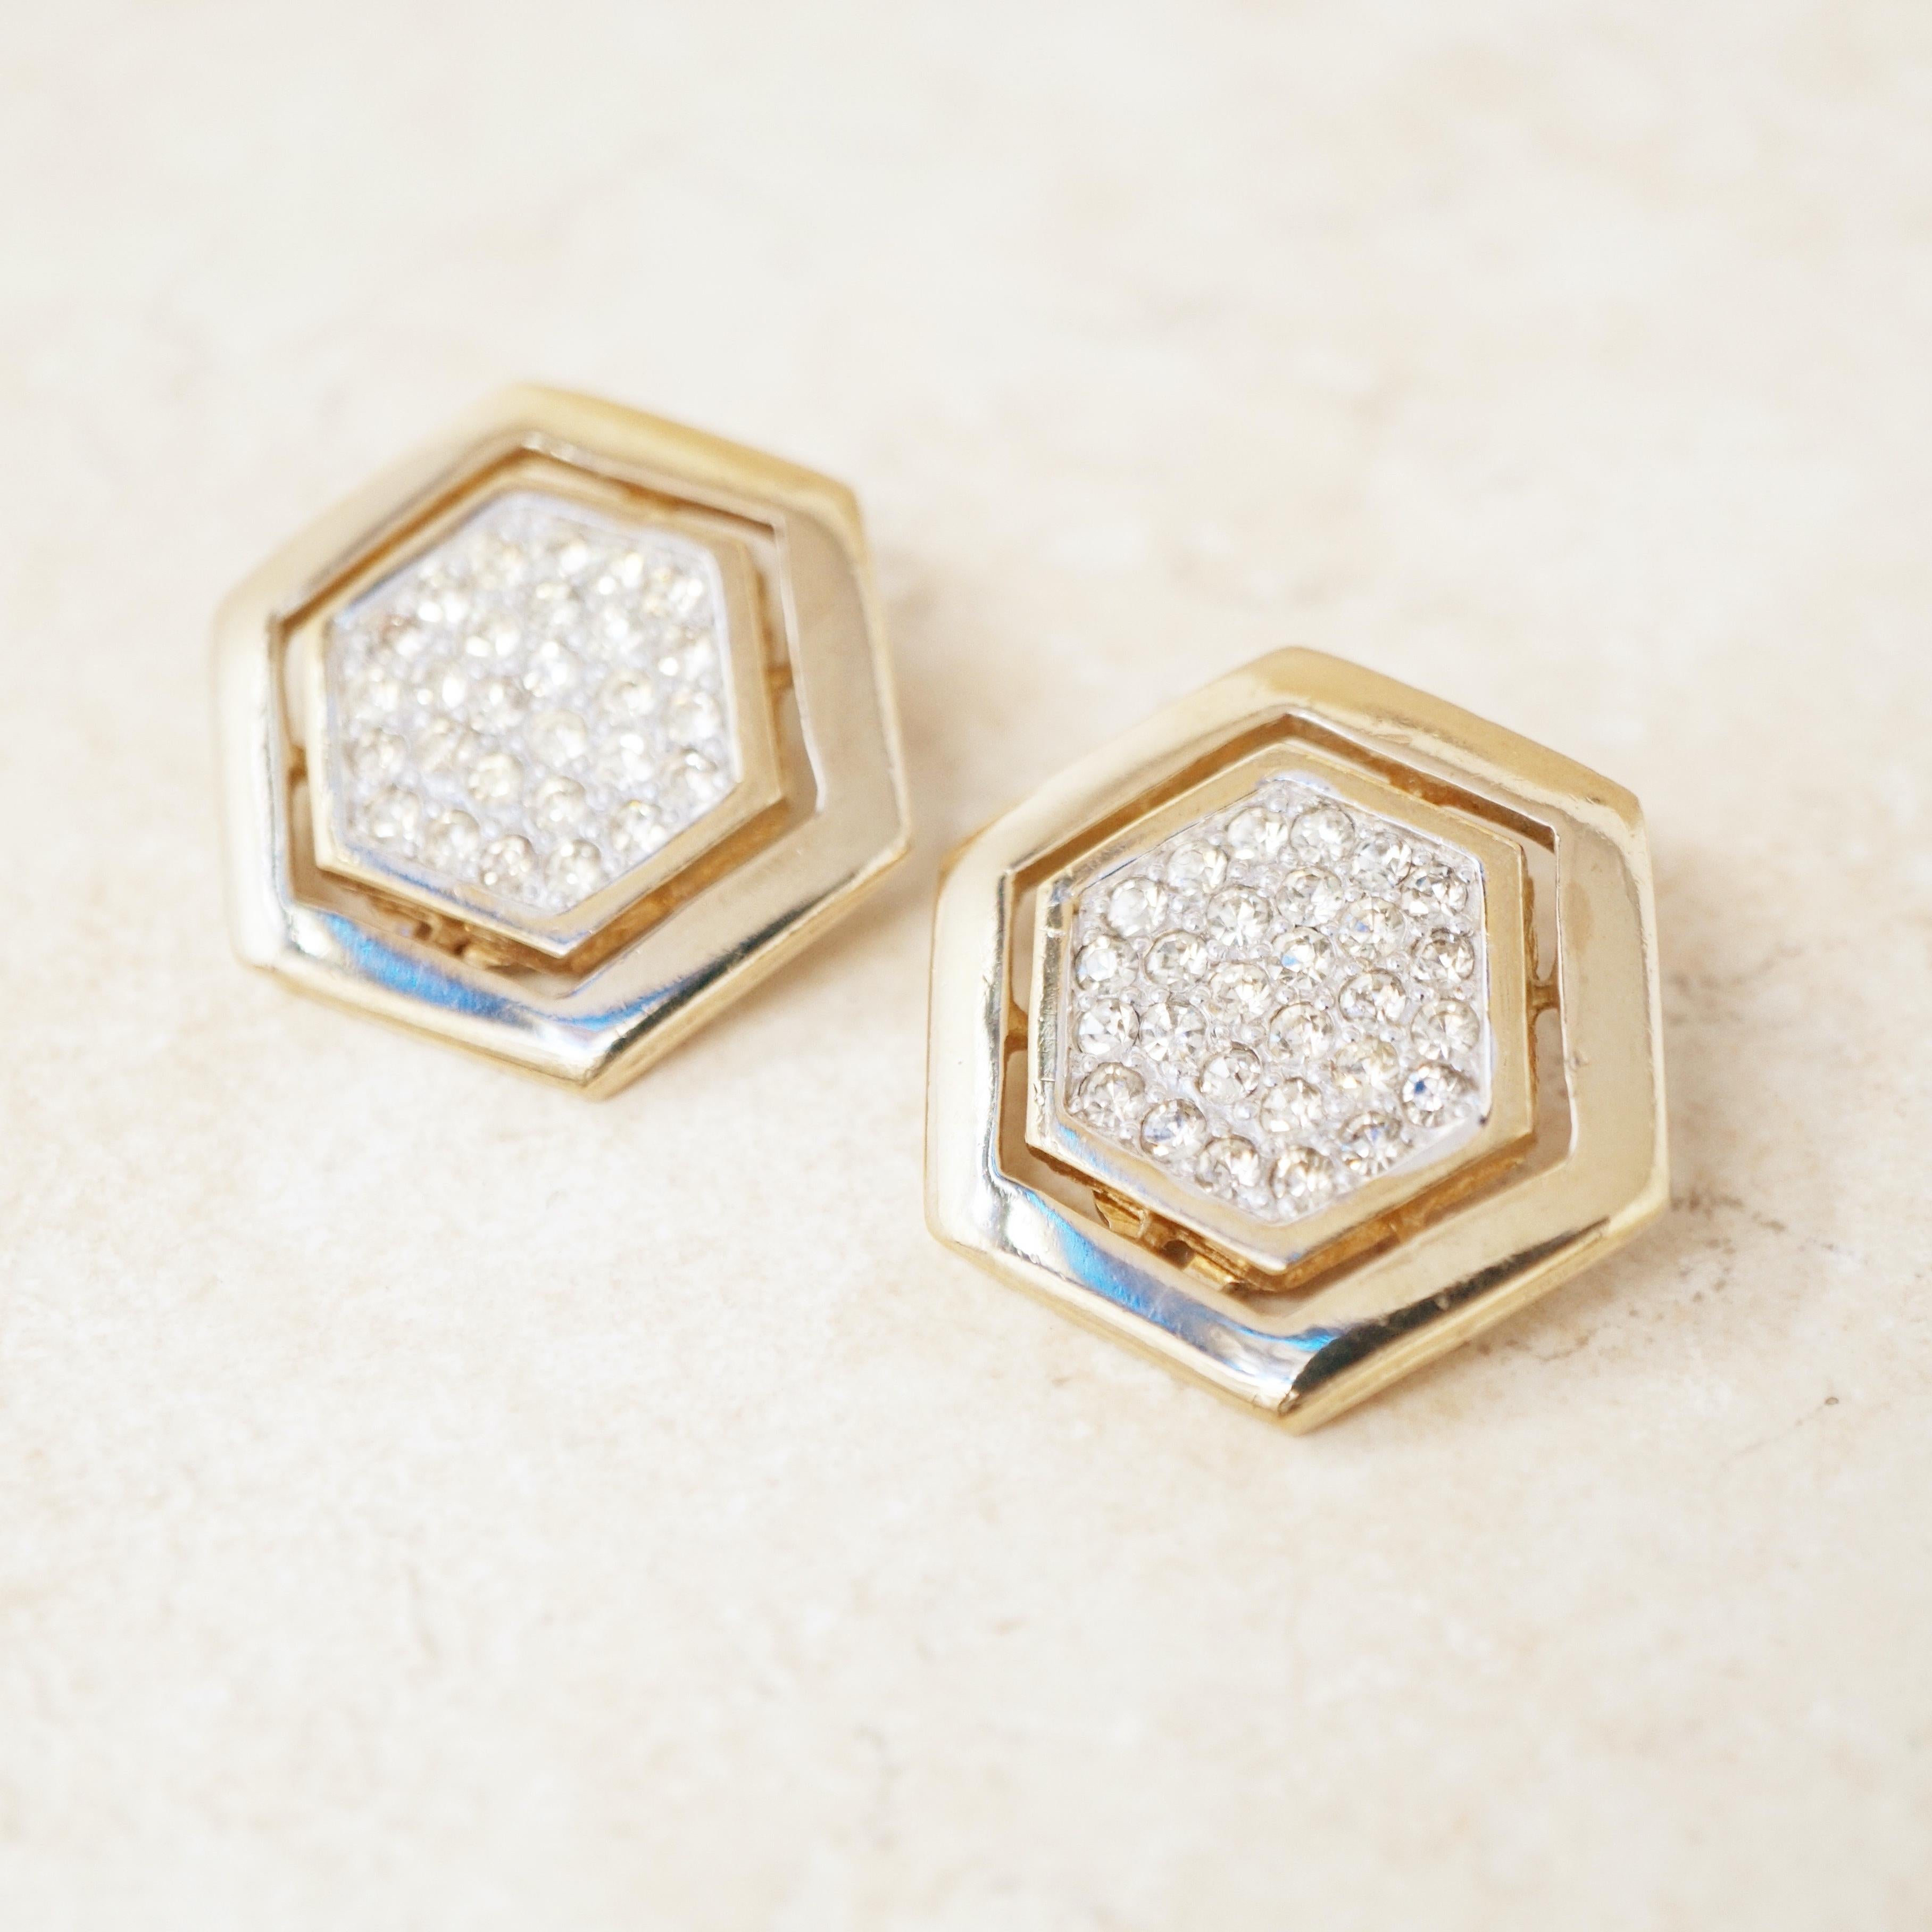 Vintage Gilded Hexagon Statement Earrings with Crystal Pavé by Panetta, 1980s For Sale 3